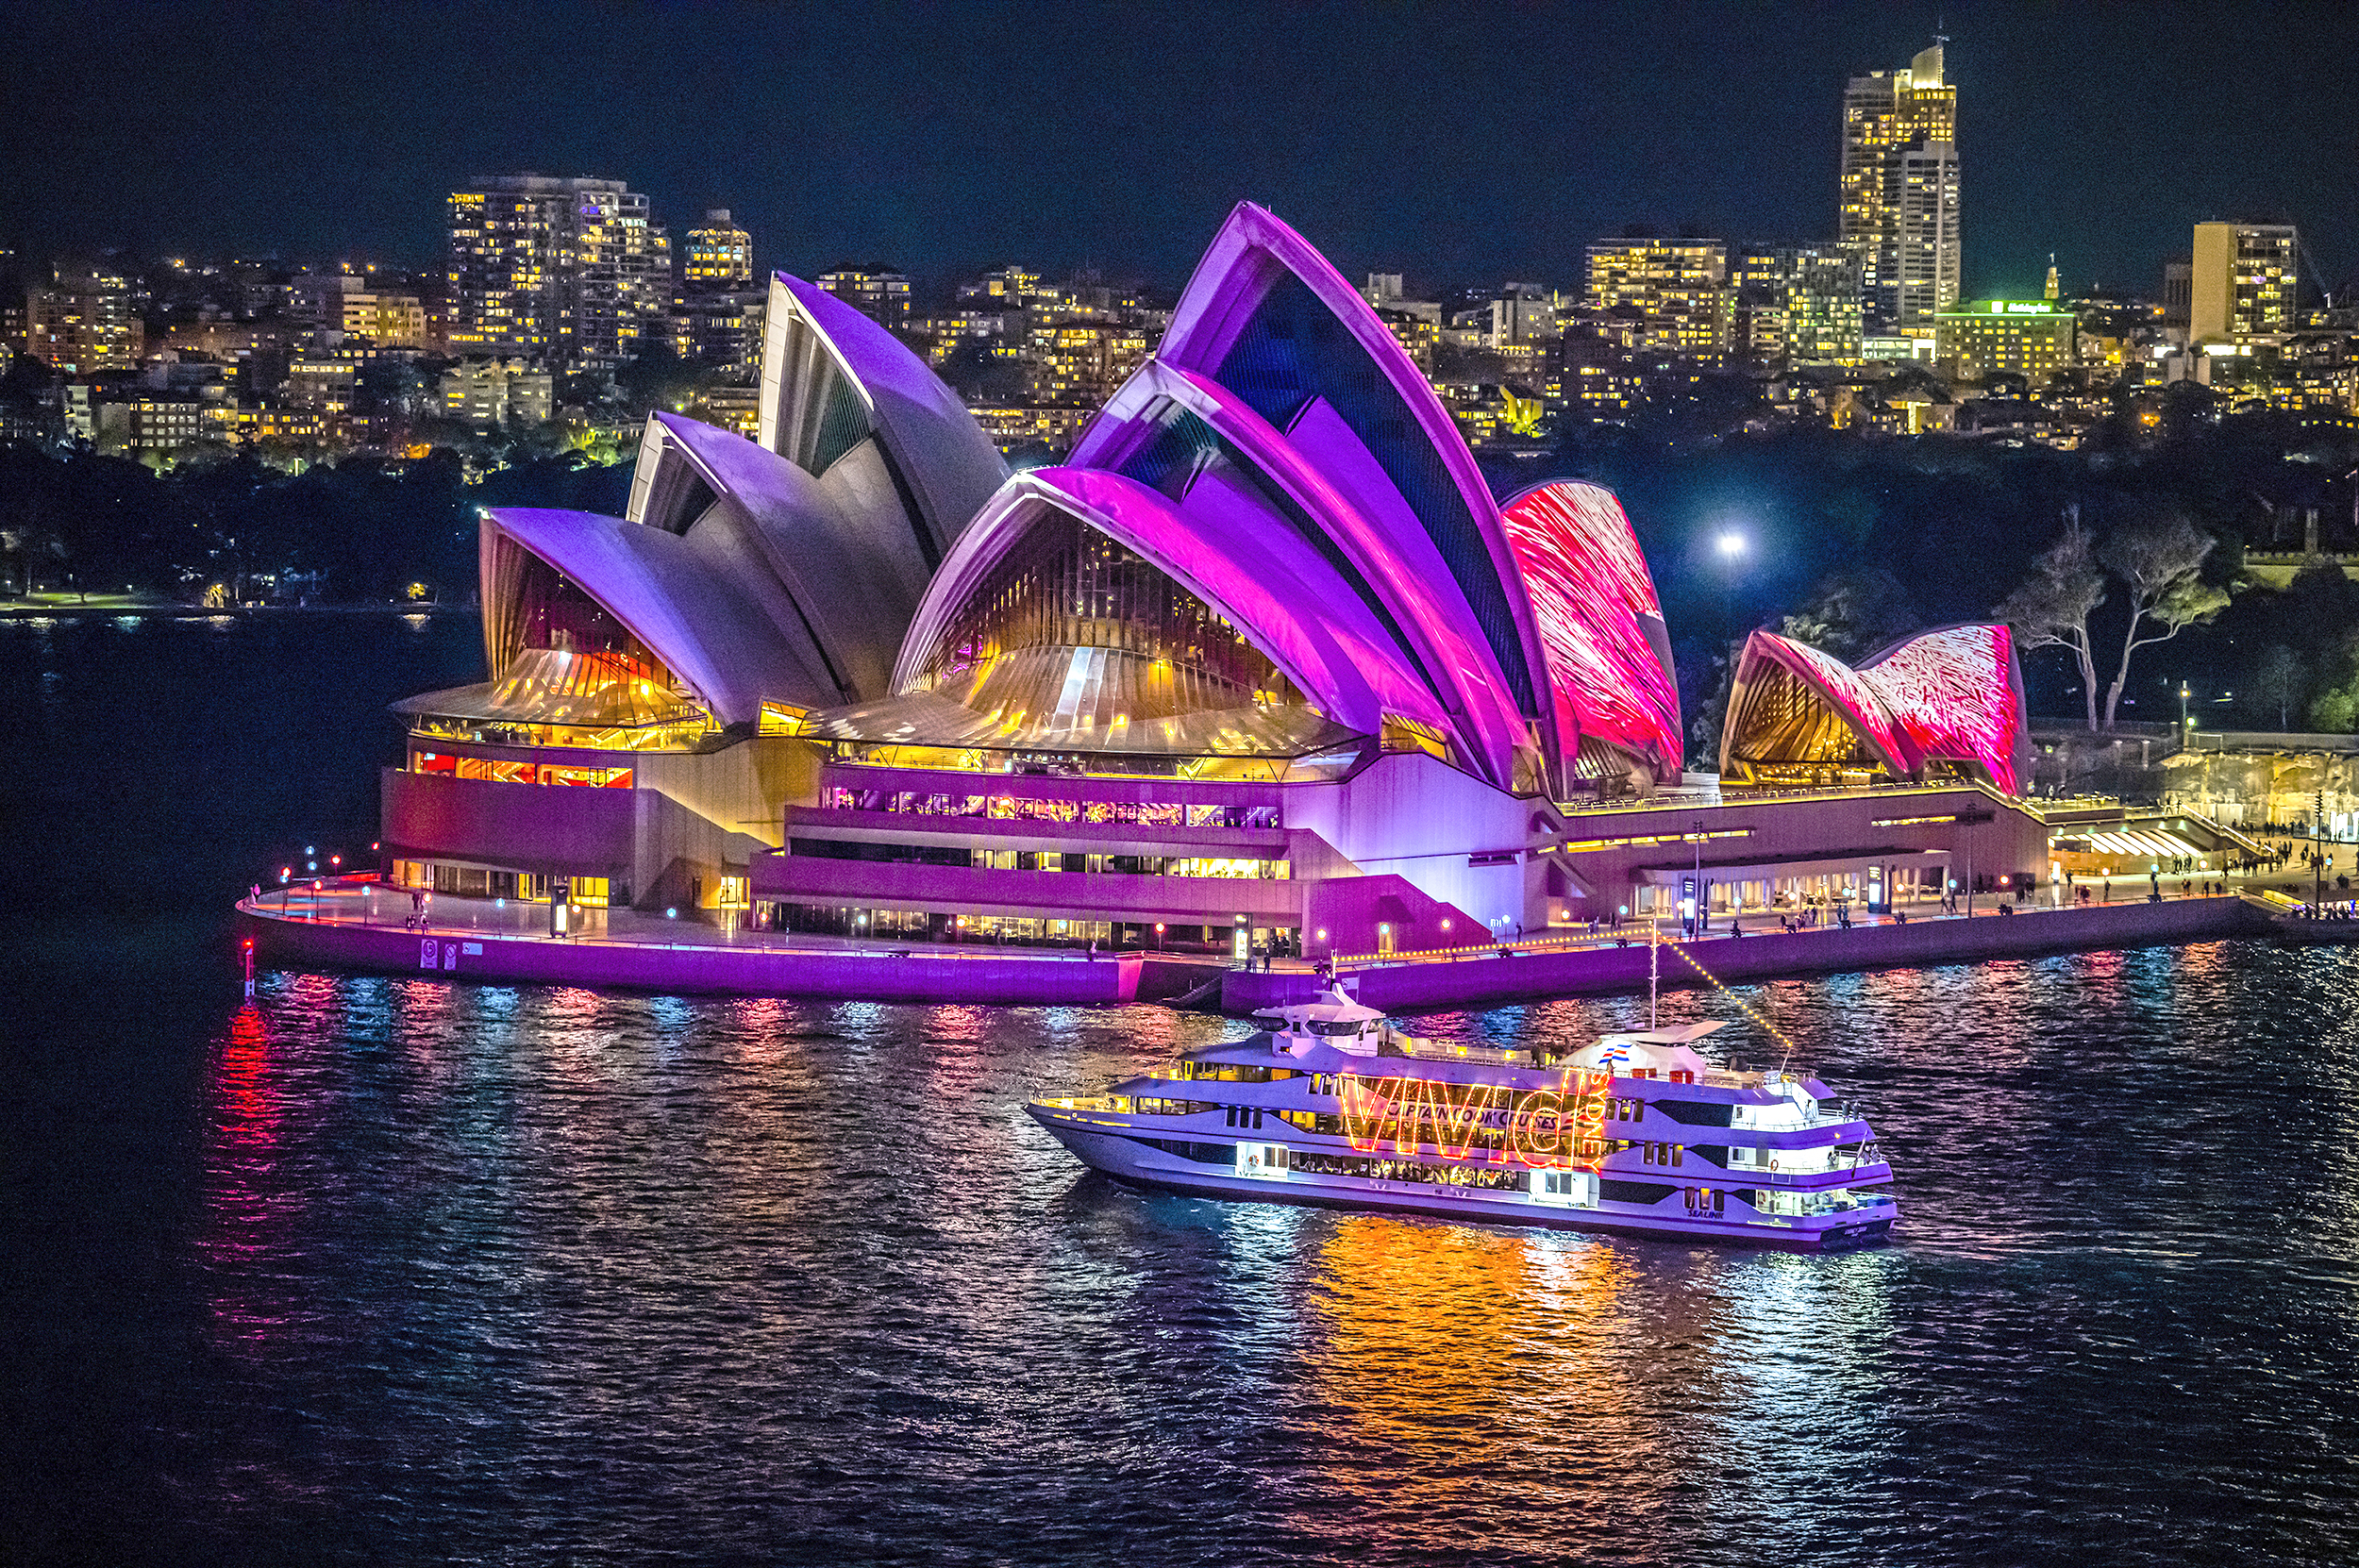 Sydney getaway with flights, hotels, Blue Mountains, Hamilton musical and more